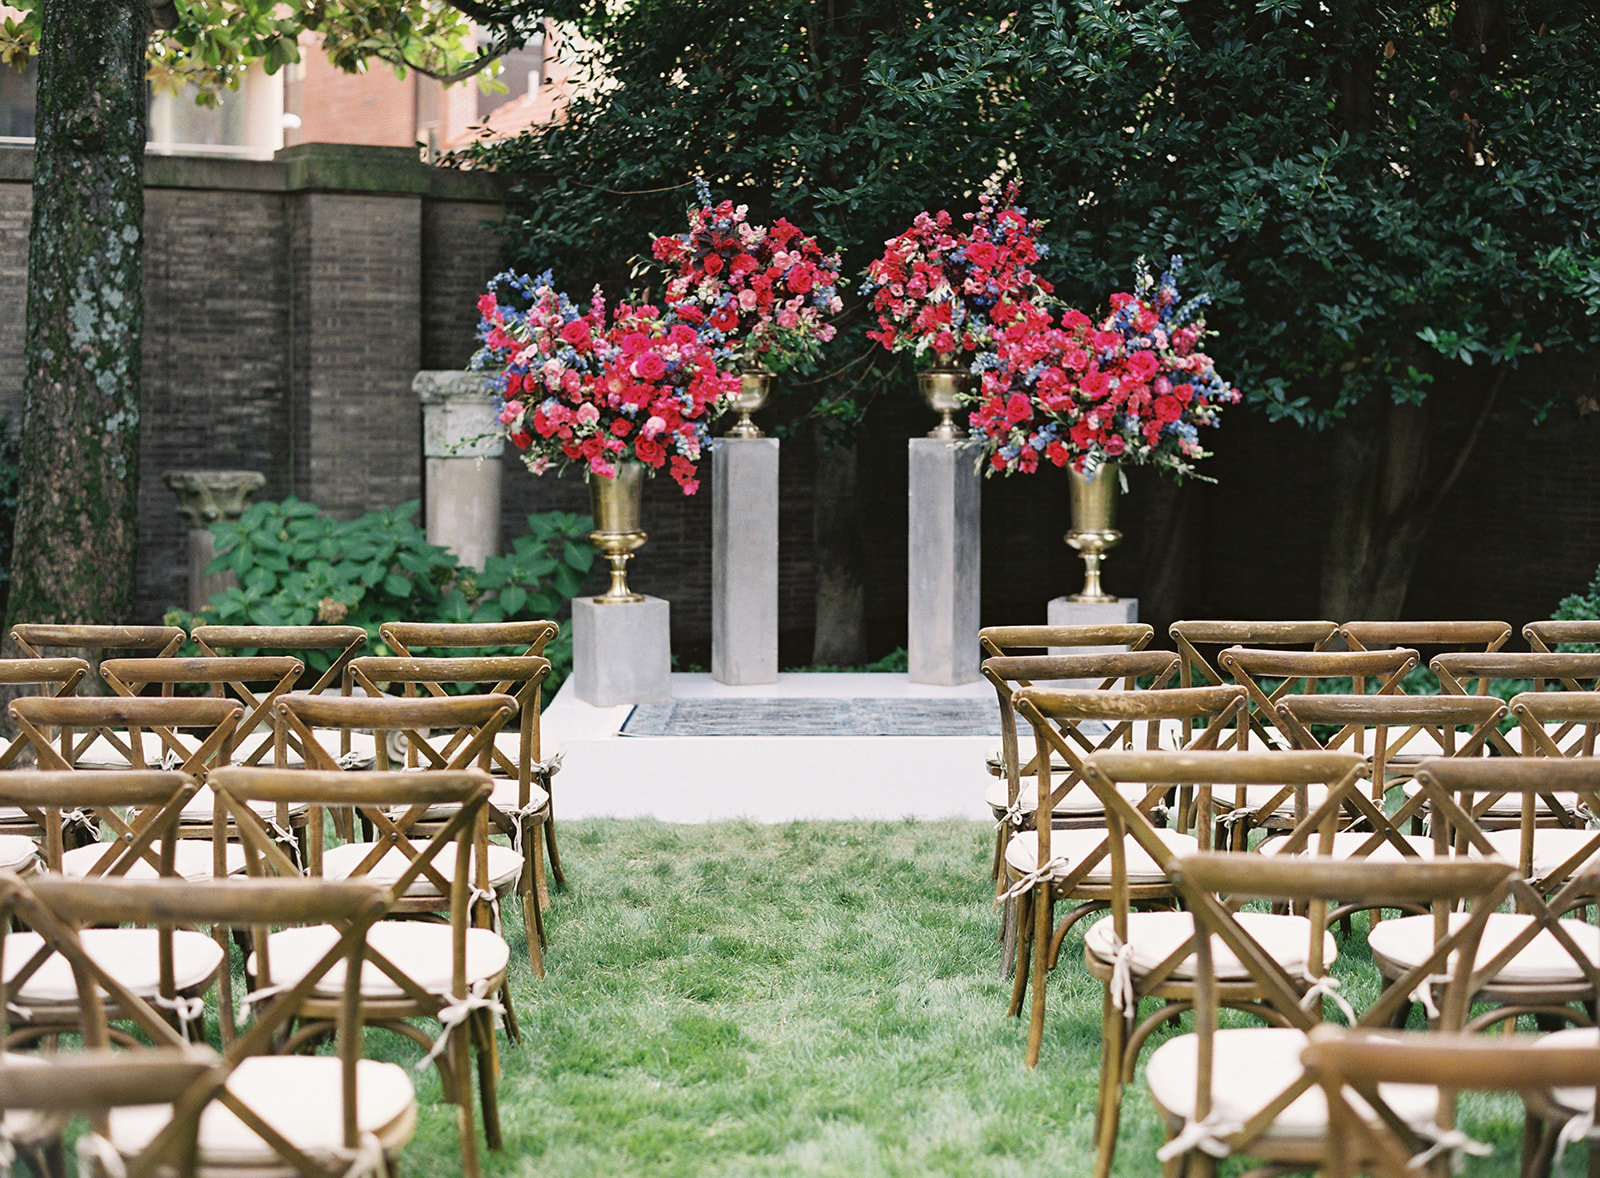 OUTDOOR WEDDING CEREMONY AT LARZ ANDERSON HOUSE